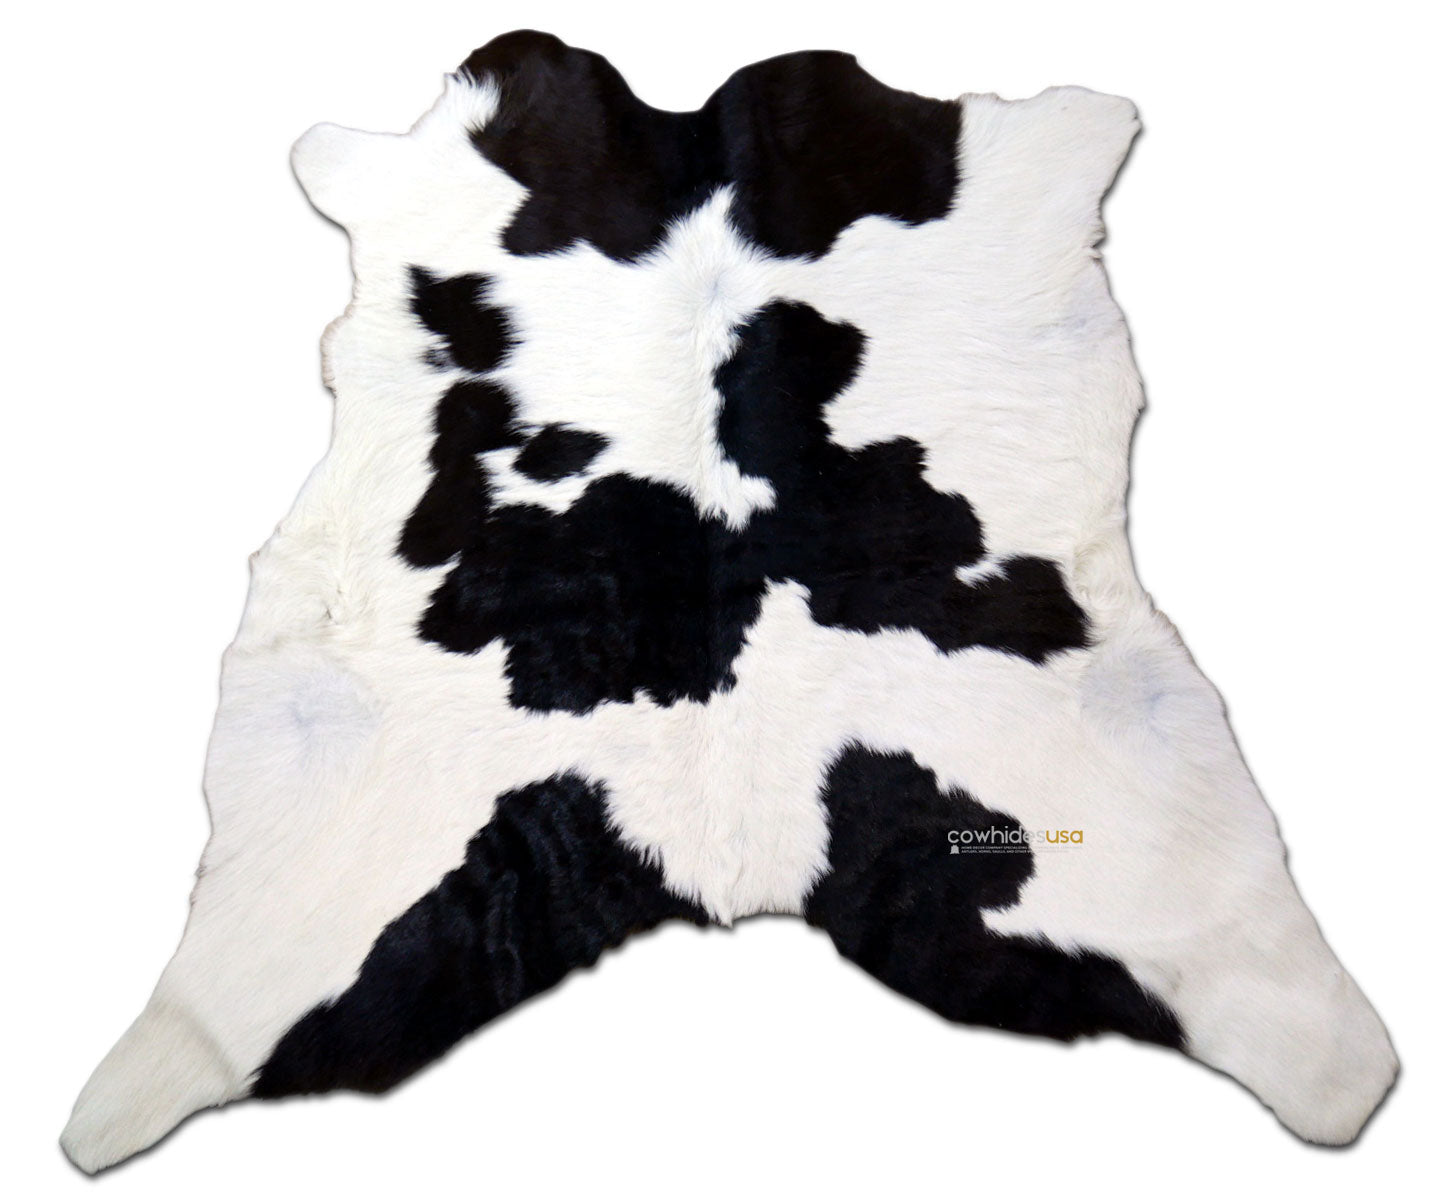 Black and White Calfskin Size: 36"X 29" Long Haired Black and White Calf Skin Mini Cowhide Rug